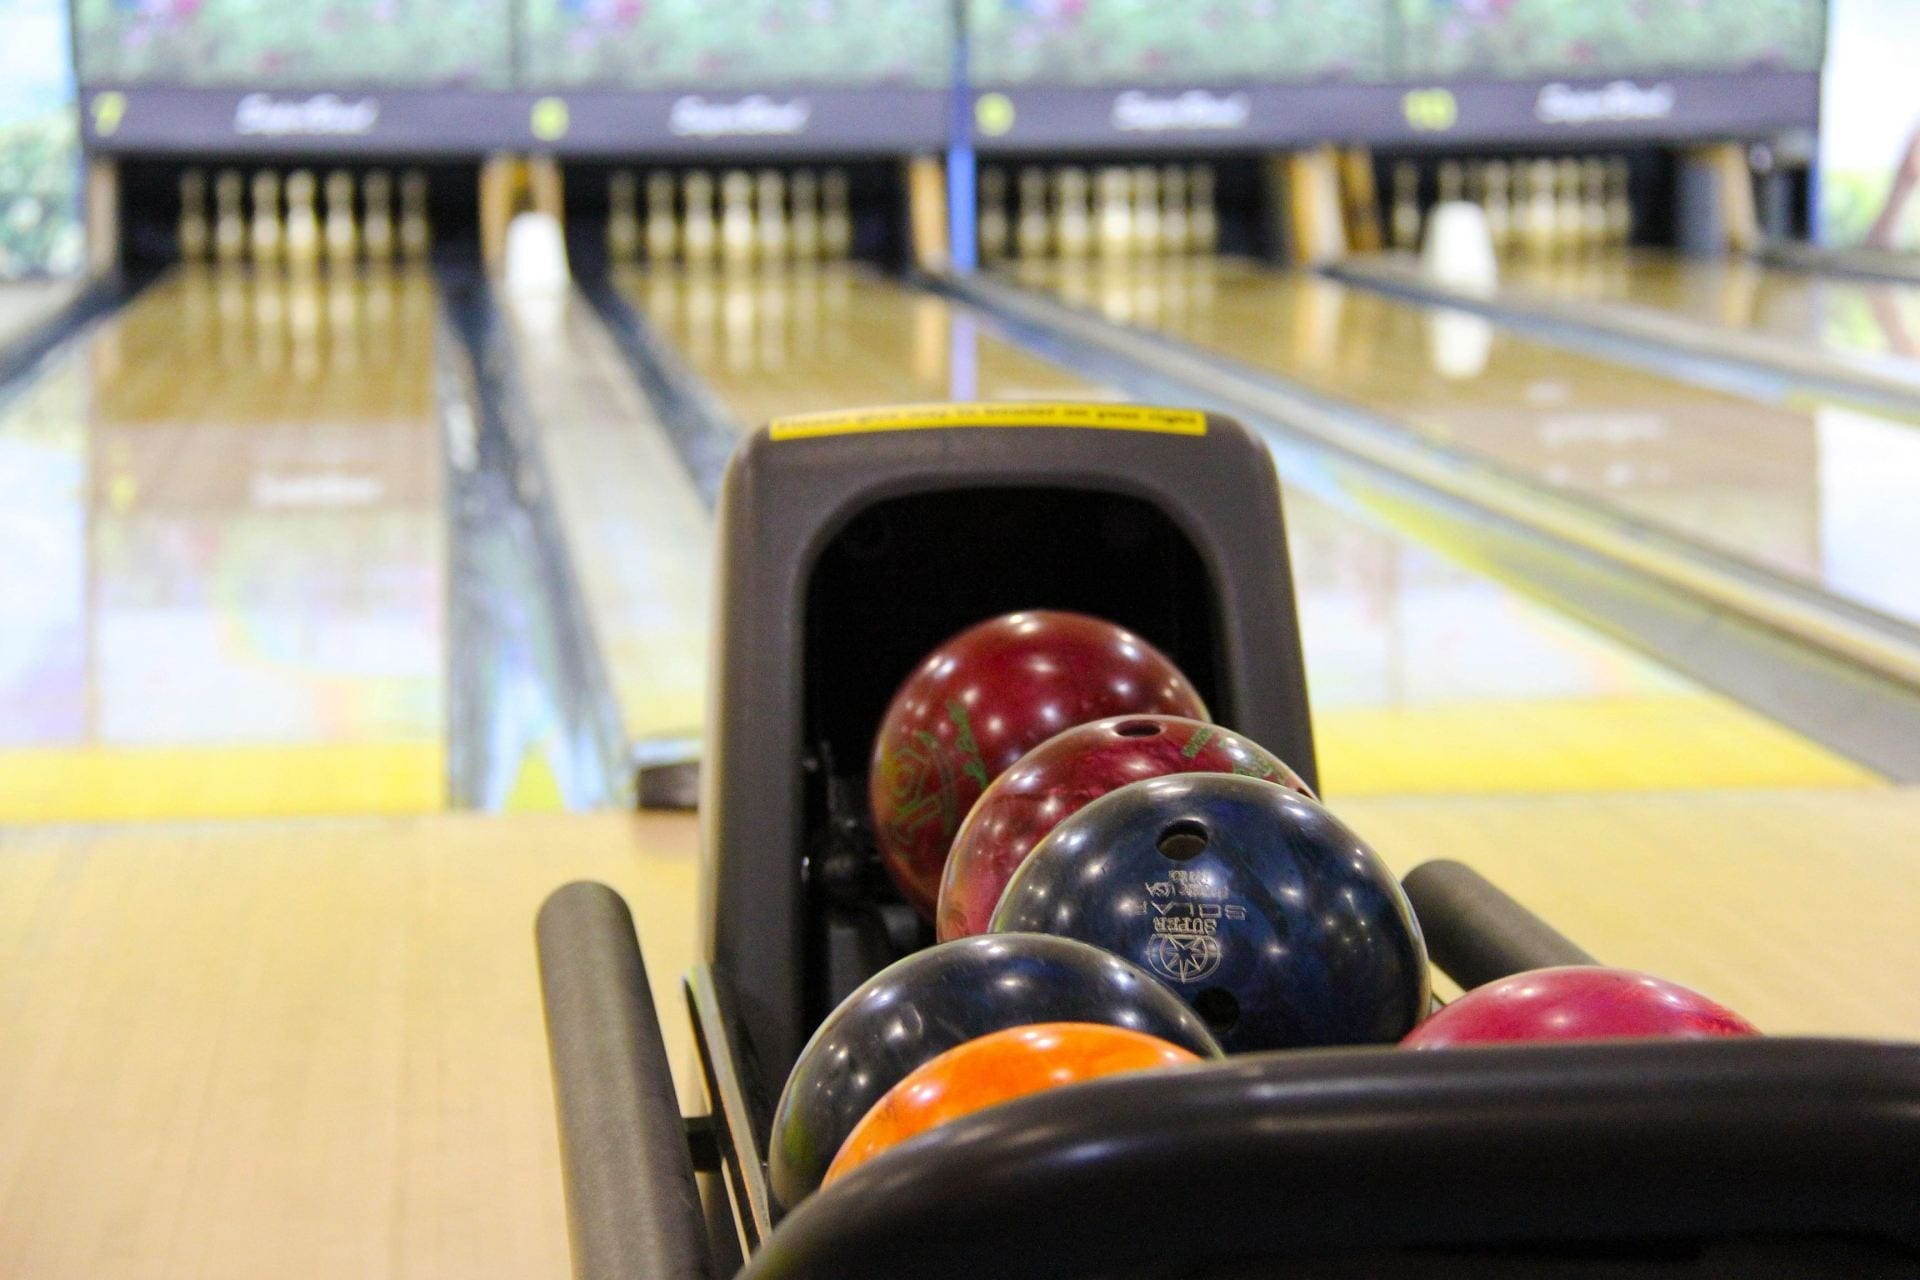 Bowling balls, in front of a row of bowling lanes.